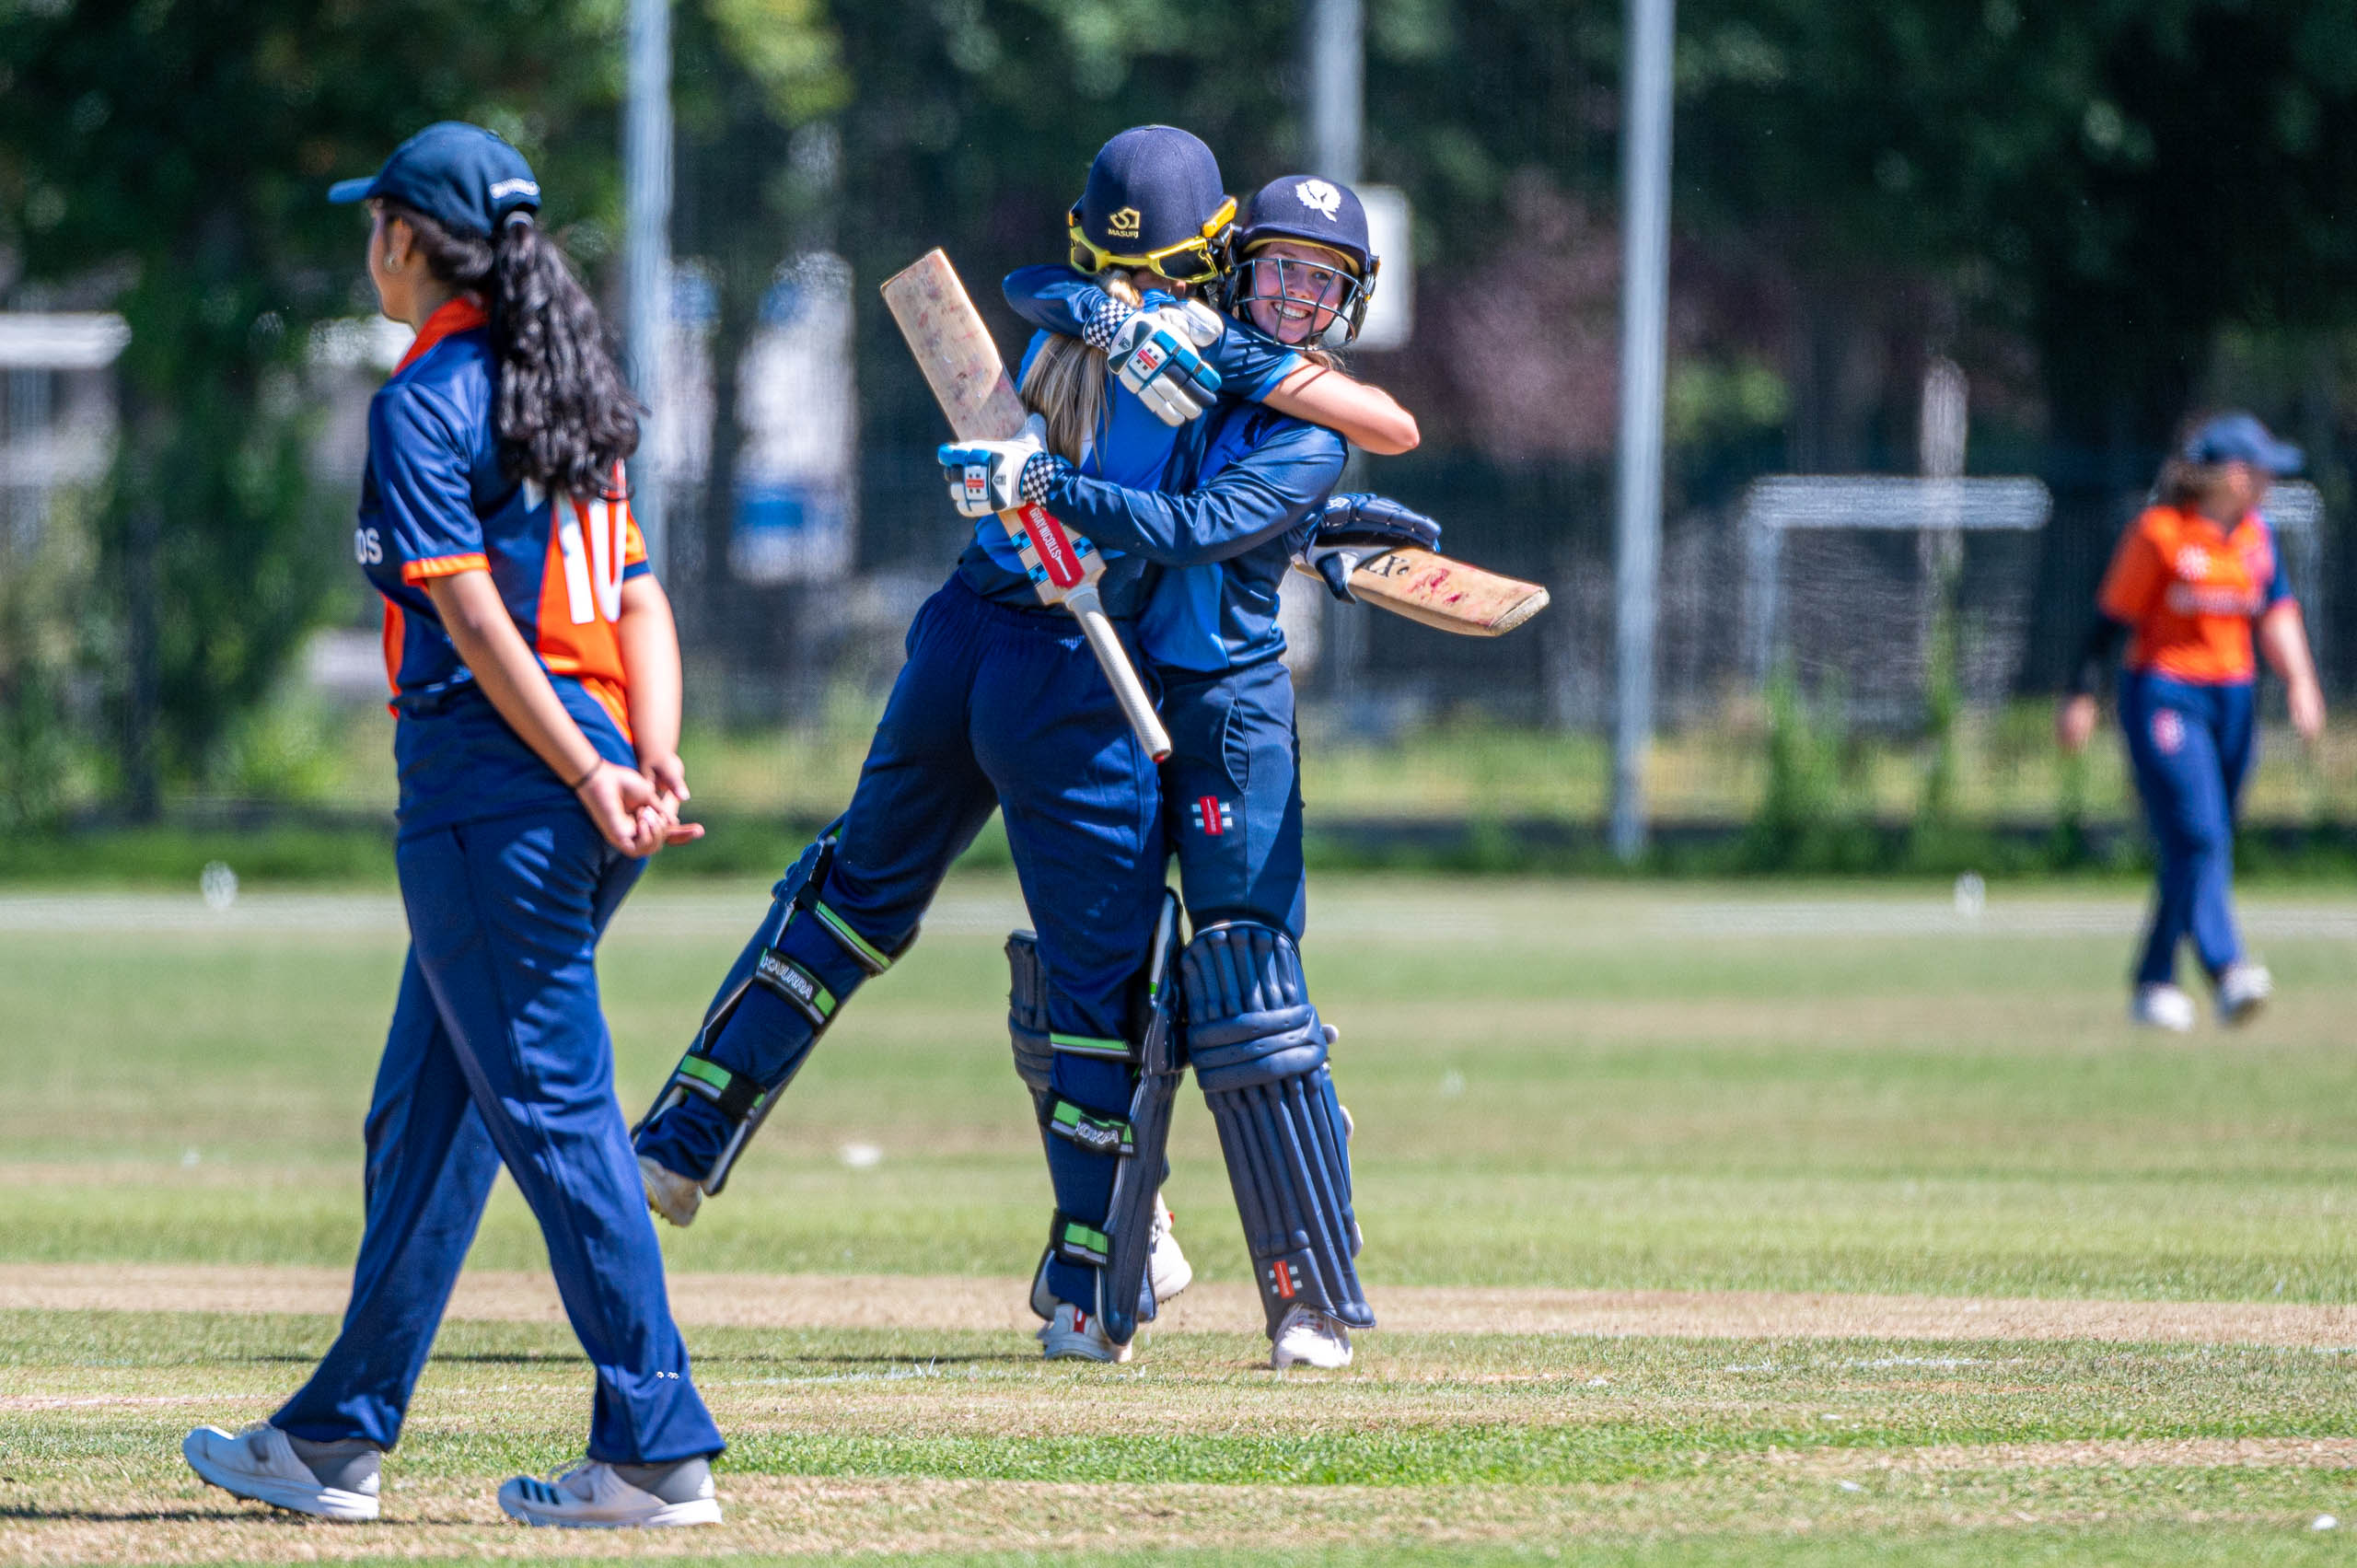 U19s qualify for first ever women’s World Cup￼